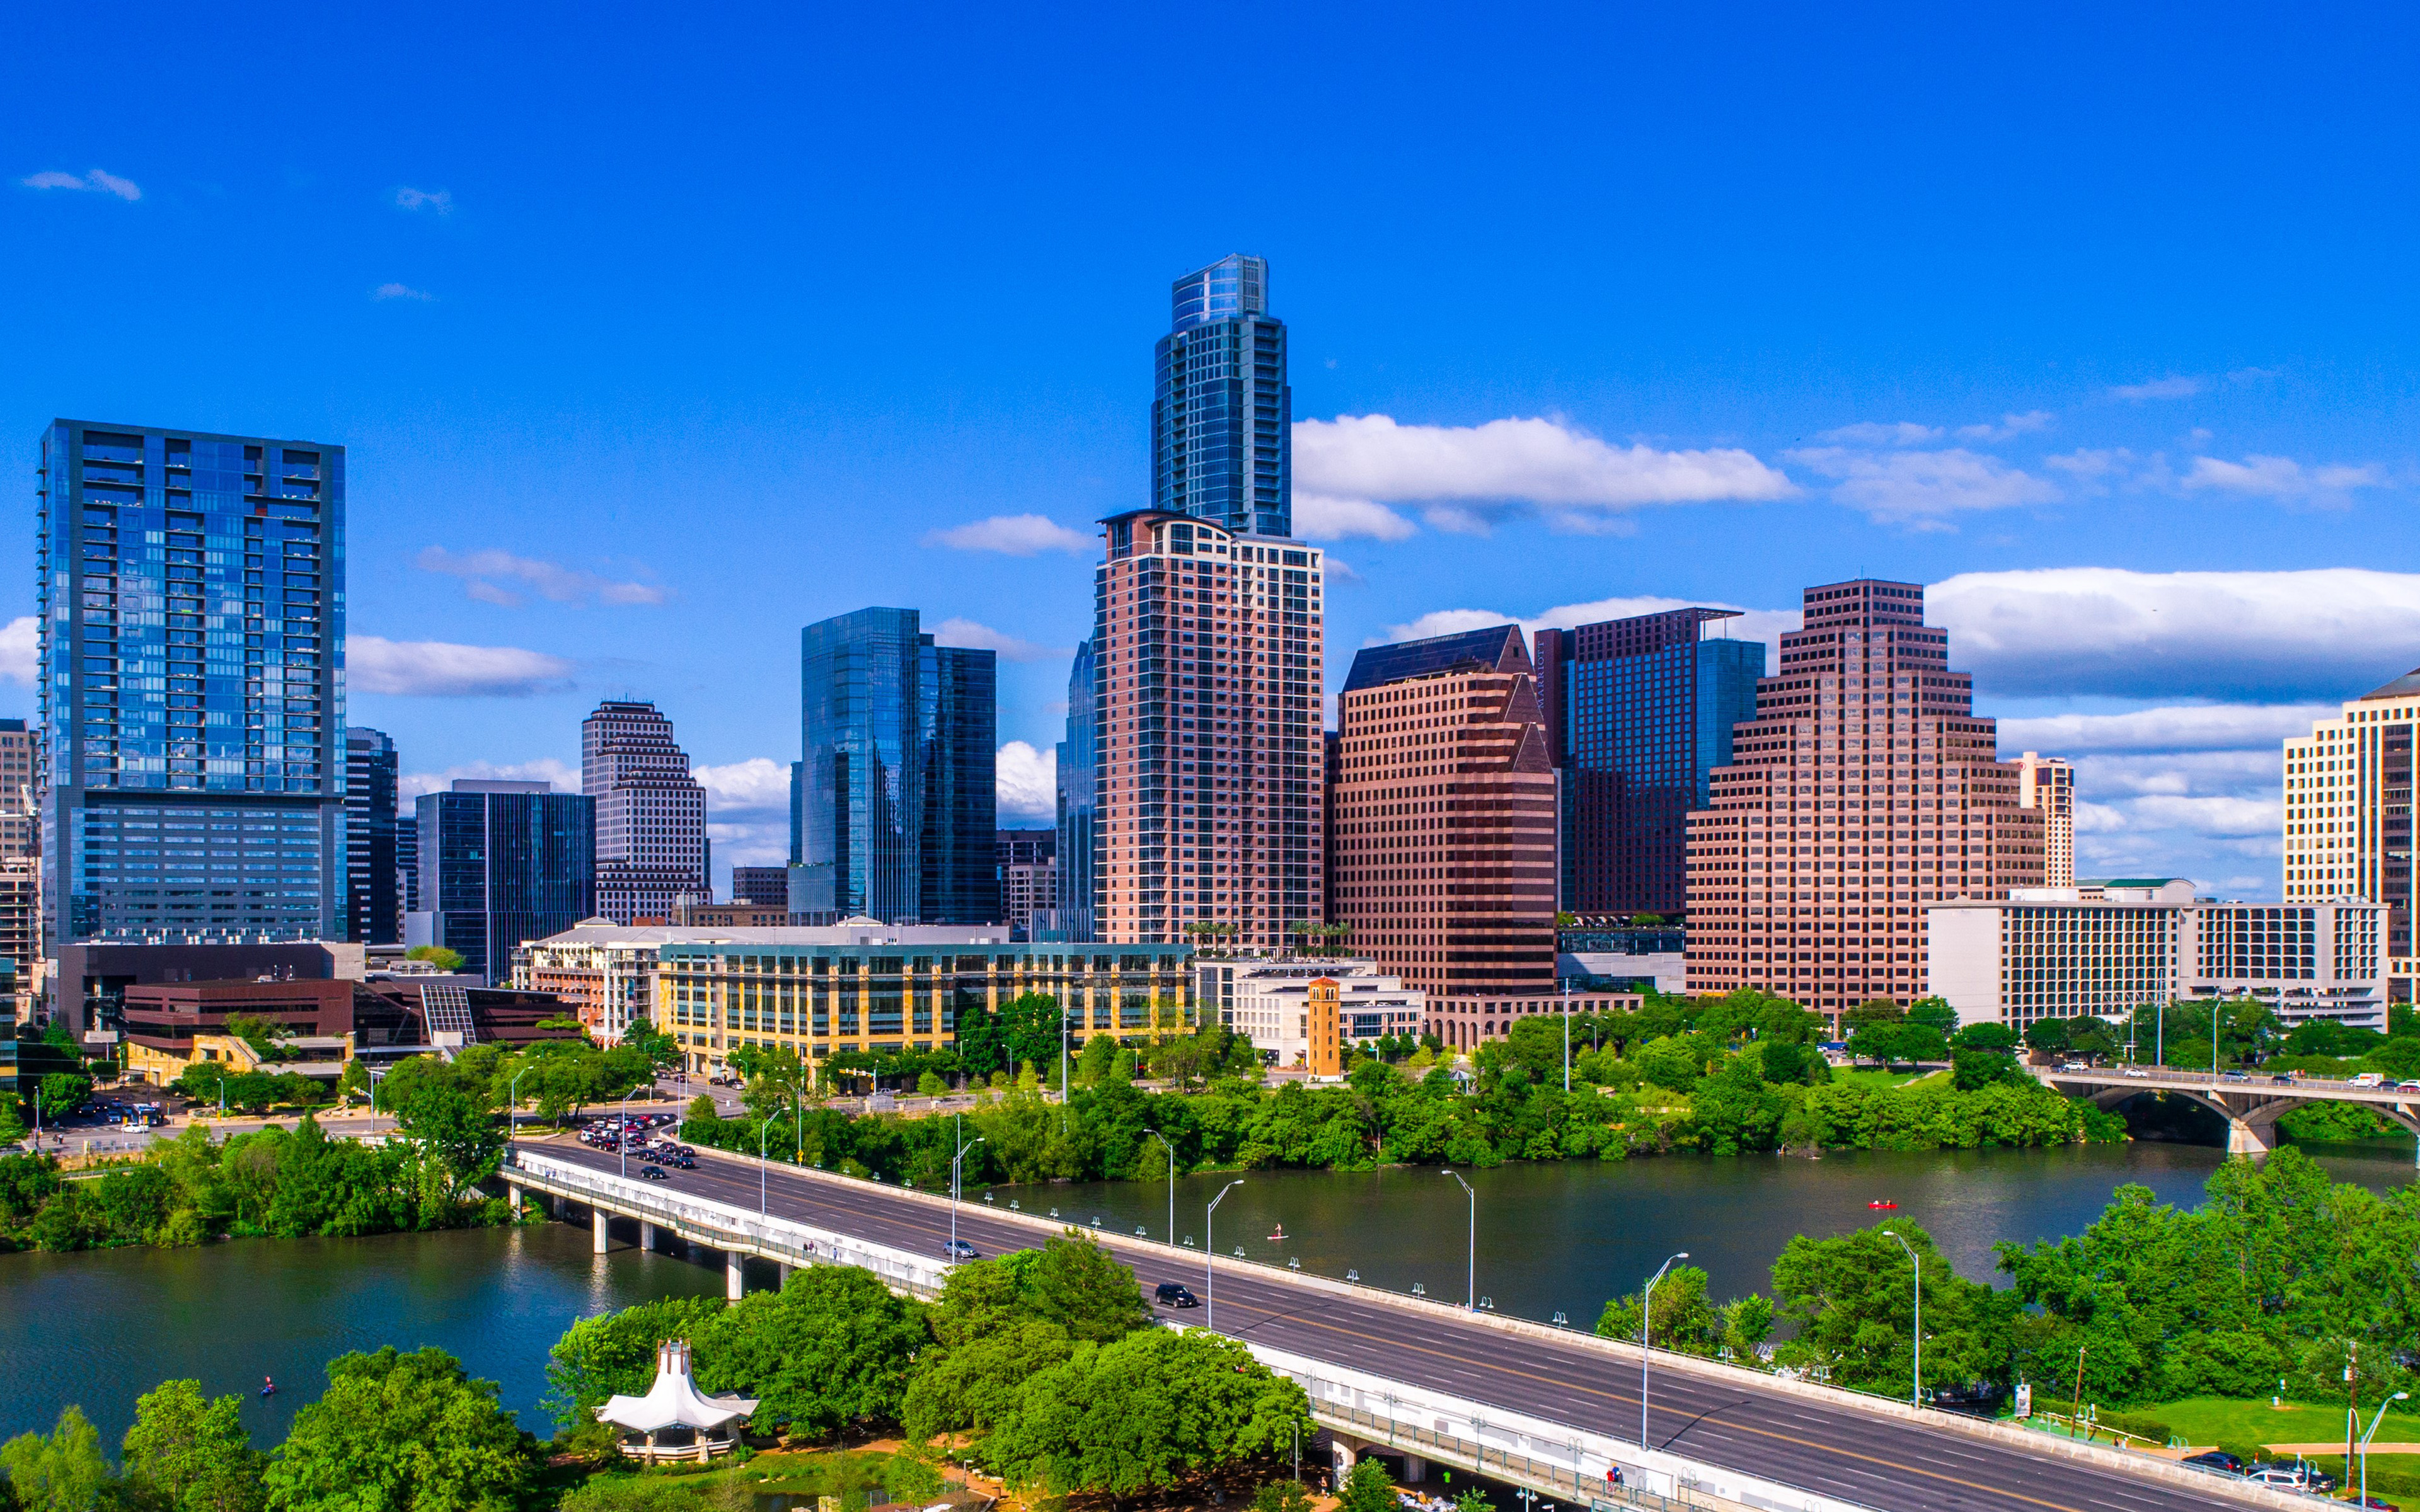 4k, Austin, Summer, Cityscapes, American Cities, Texas, Home Loans 2019